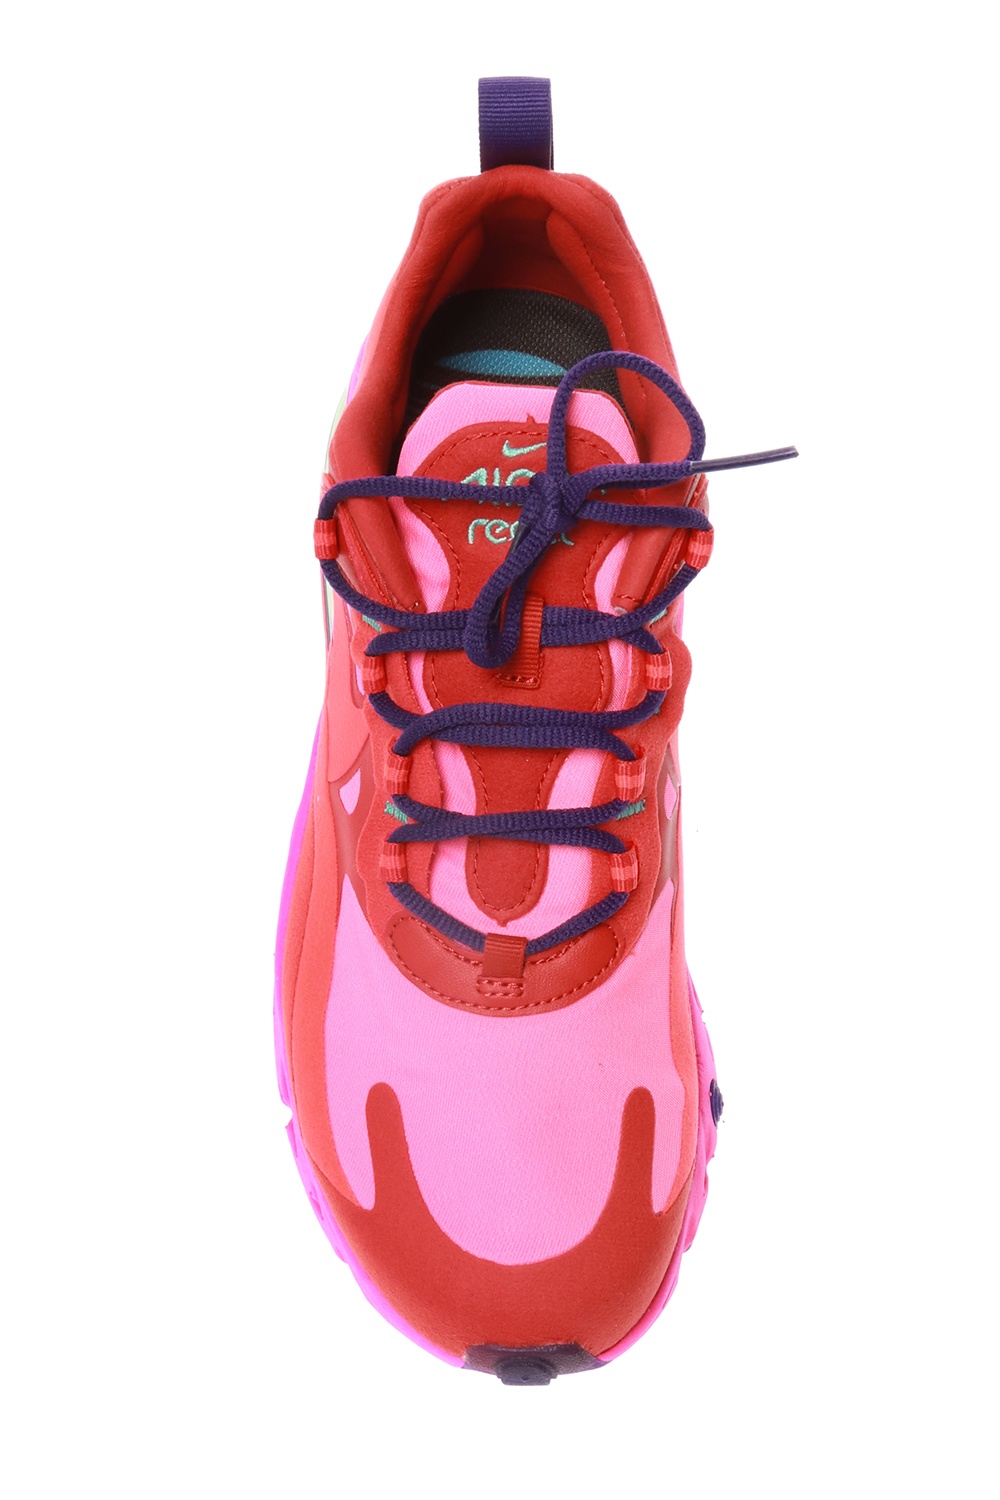 Nike Air Max 270 React Women's Shoes Red-Pink-Purple at6174-600 